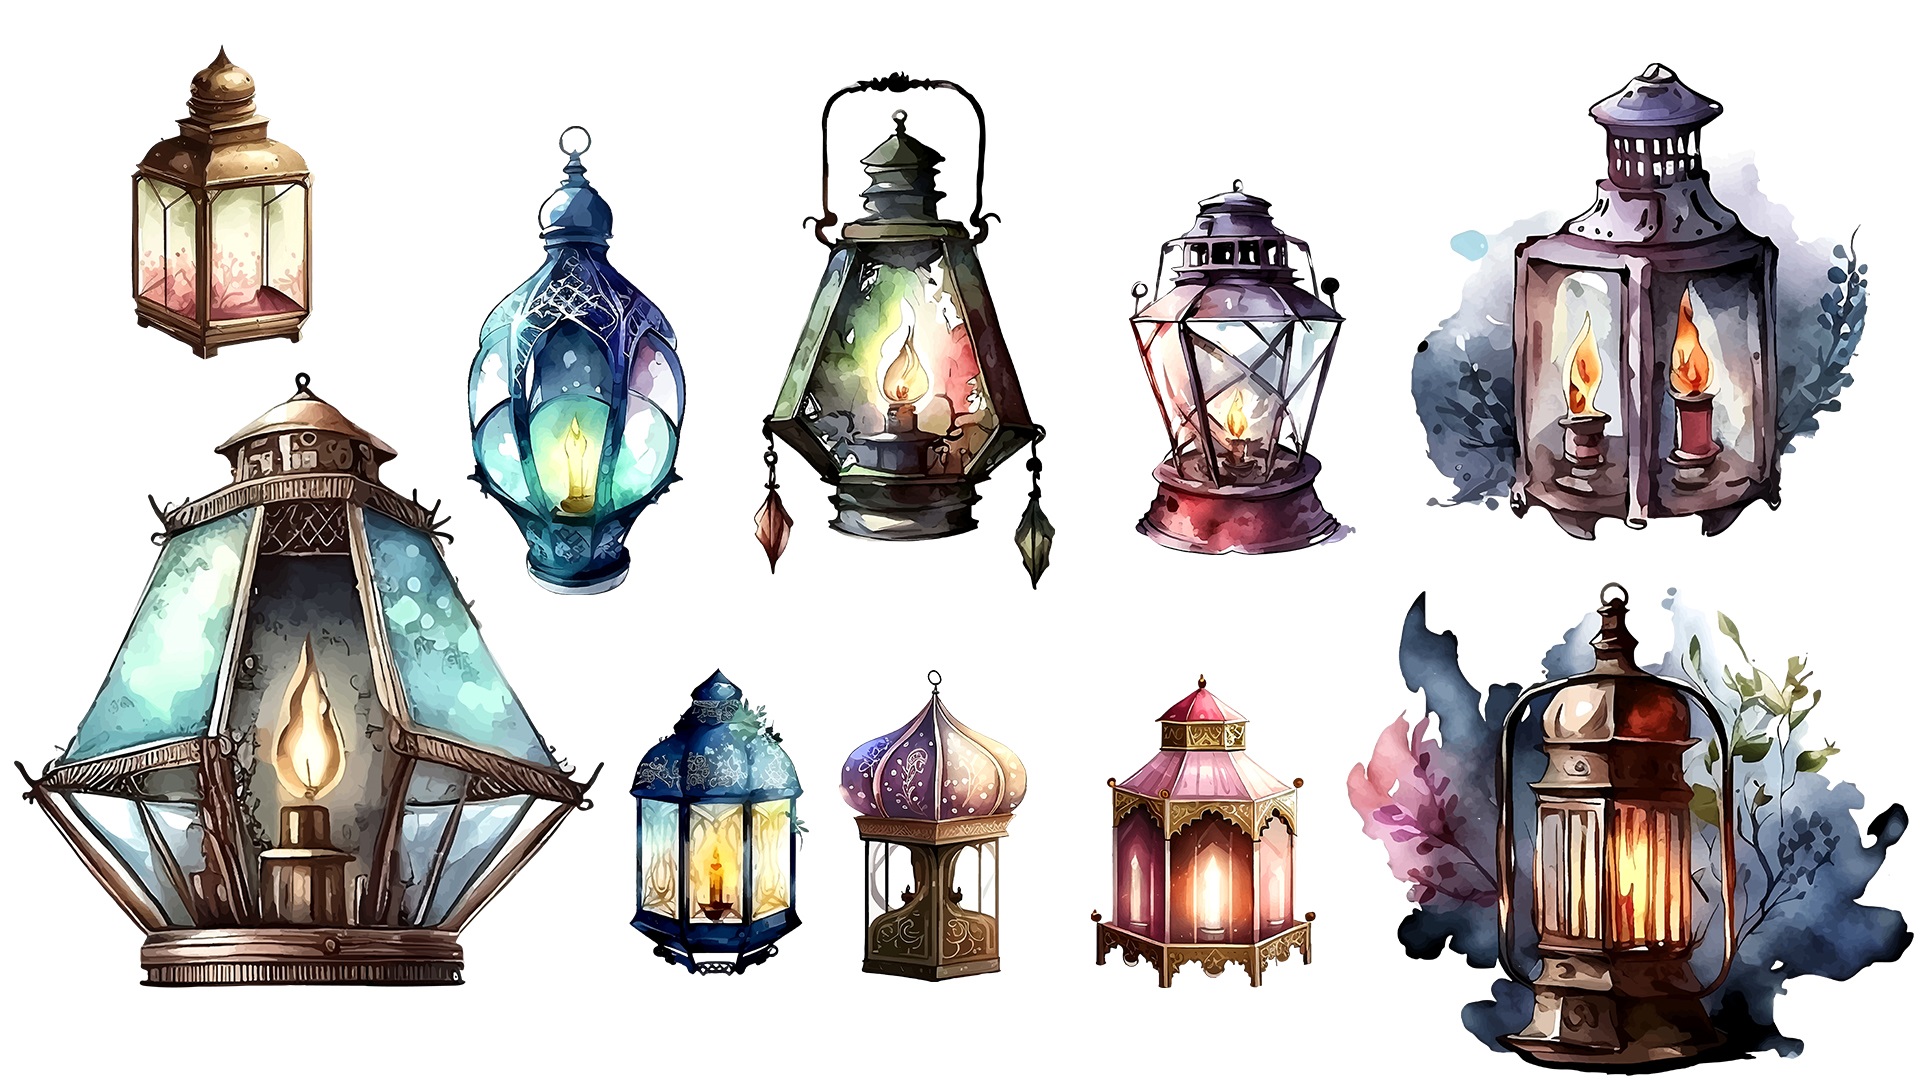 Bunch of different types of lanterns on a white background.